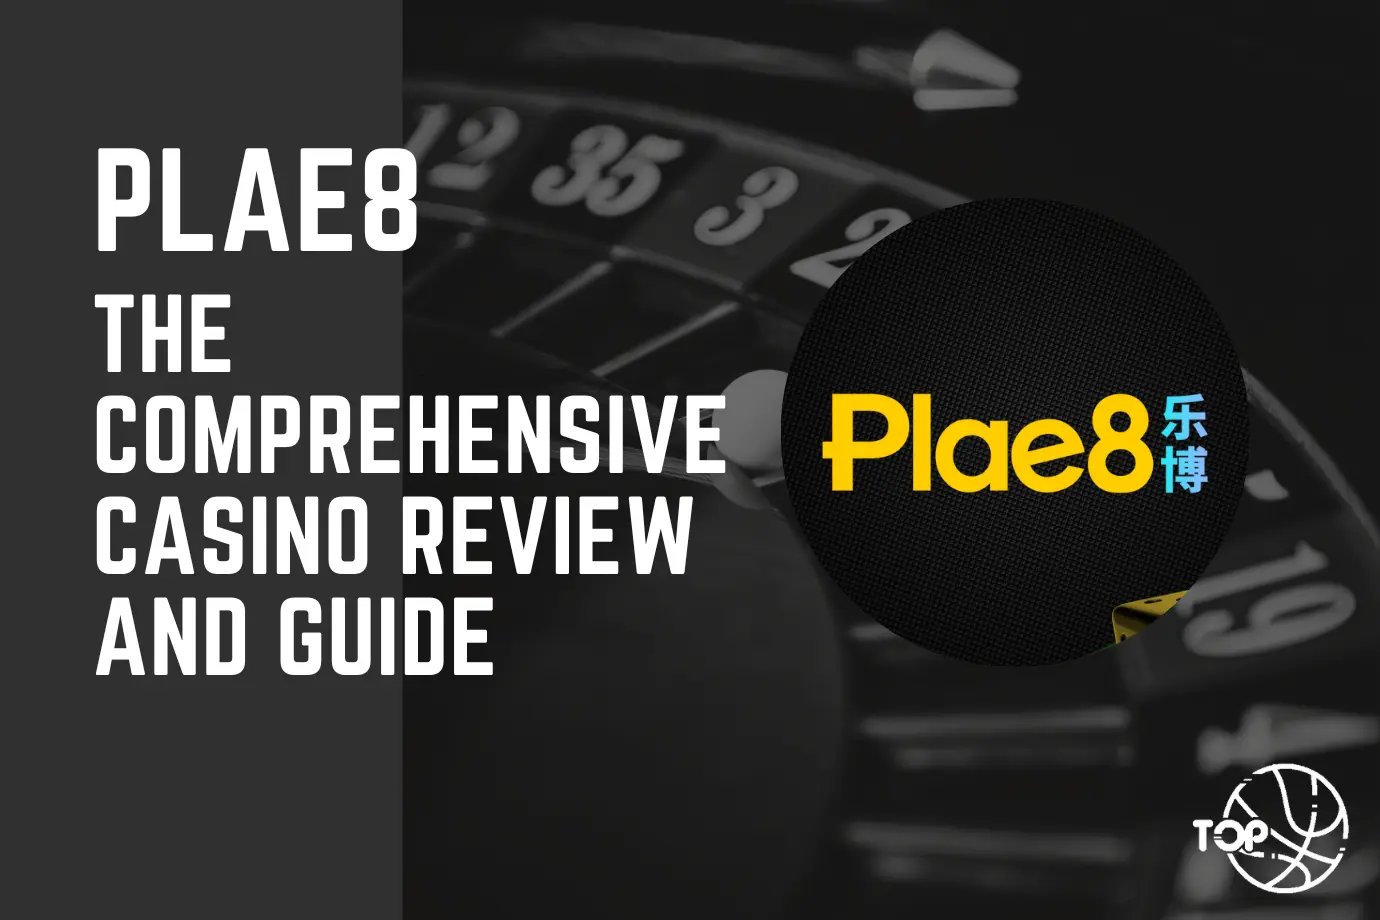 PLAE8: The Comprehensive Casino Review and Guide